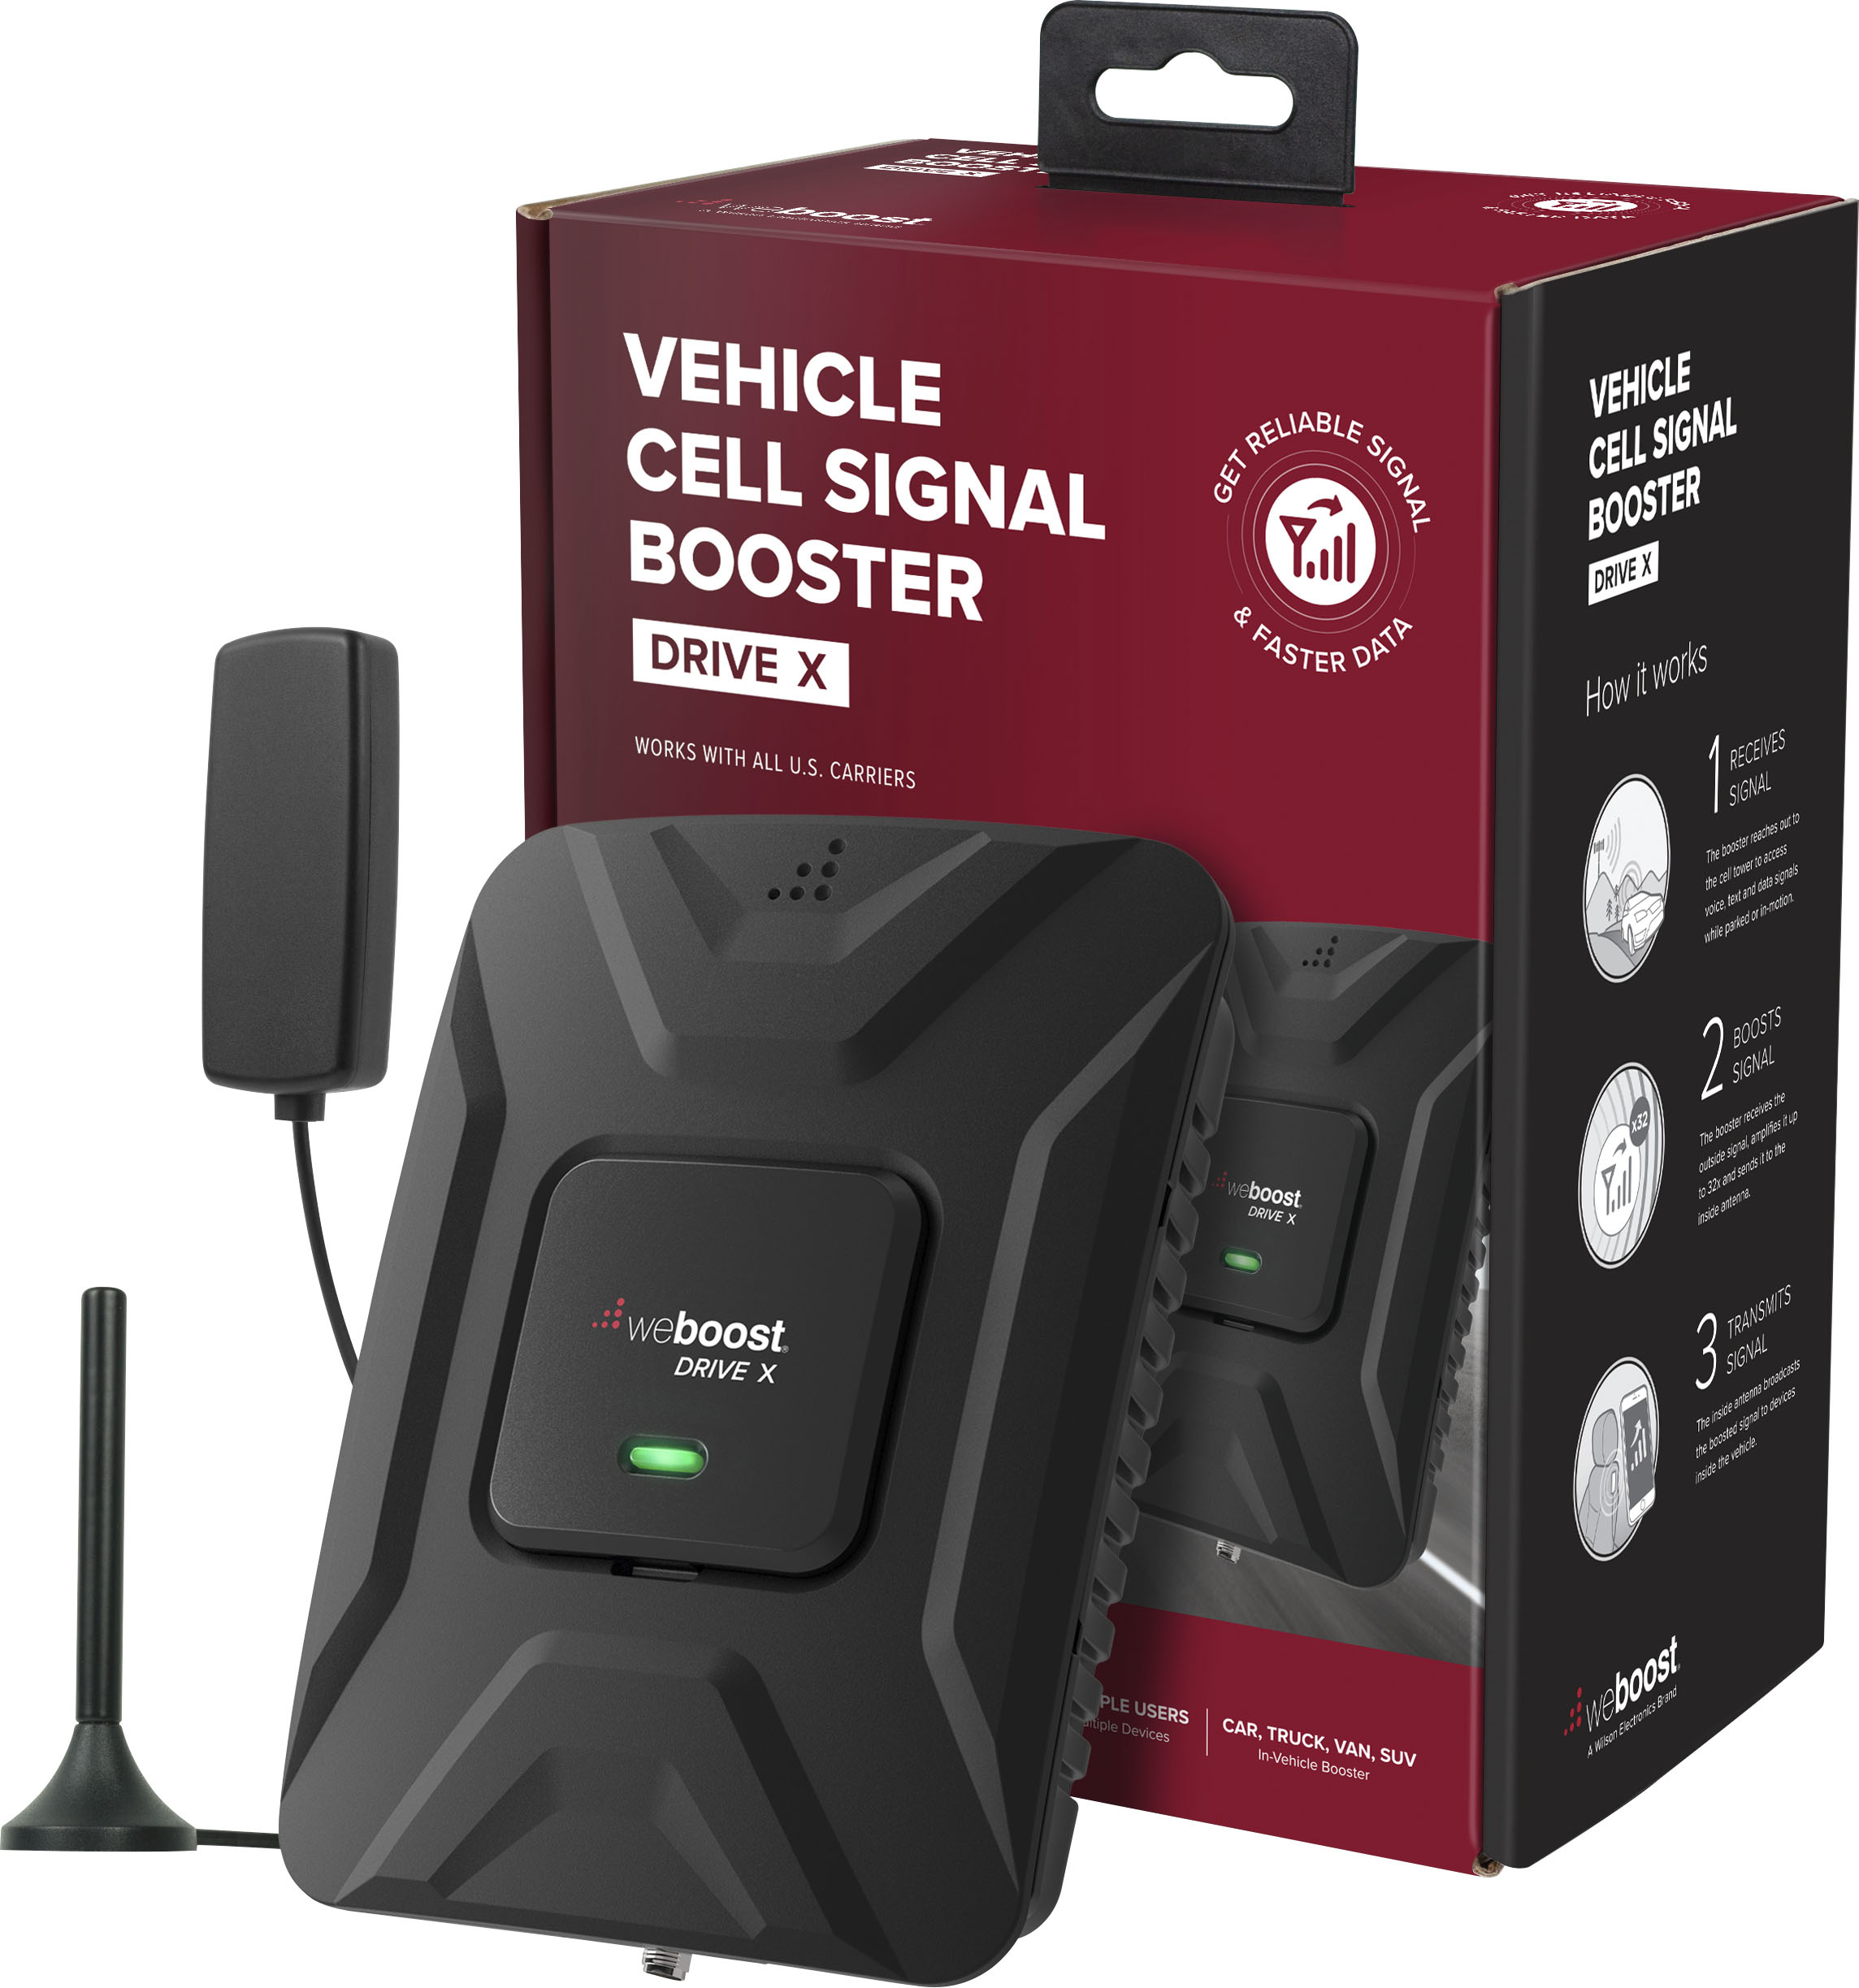 Angle View: weBoost - Drive X Vehicle Cell Phone Signal Booster for Car, Truck, Van, or SUV, Boosts 5G & 4G LTE for All U.S. Carriers - Black